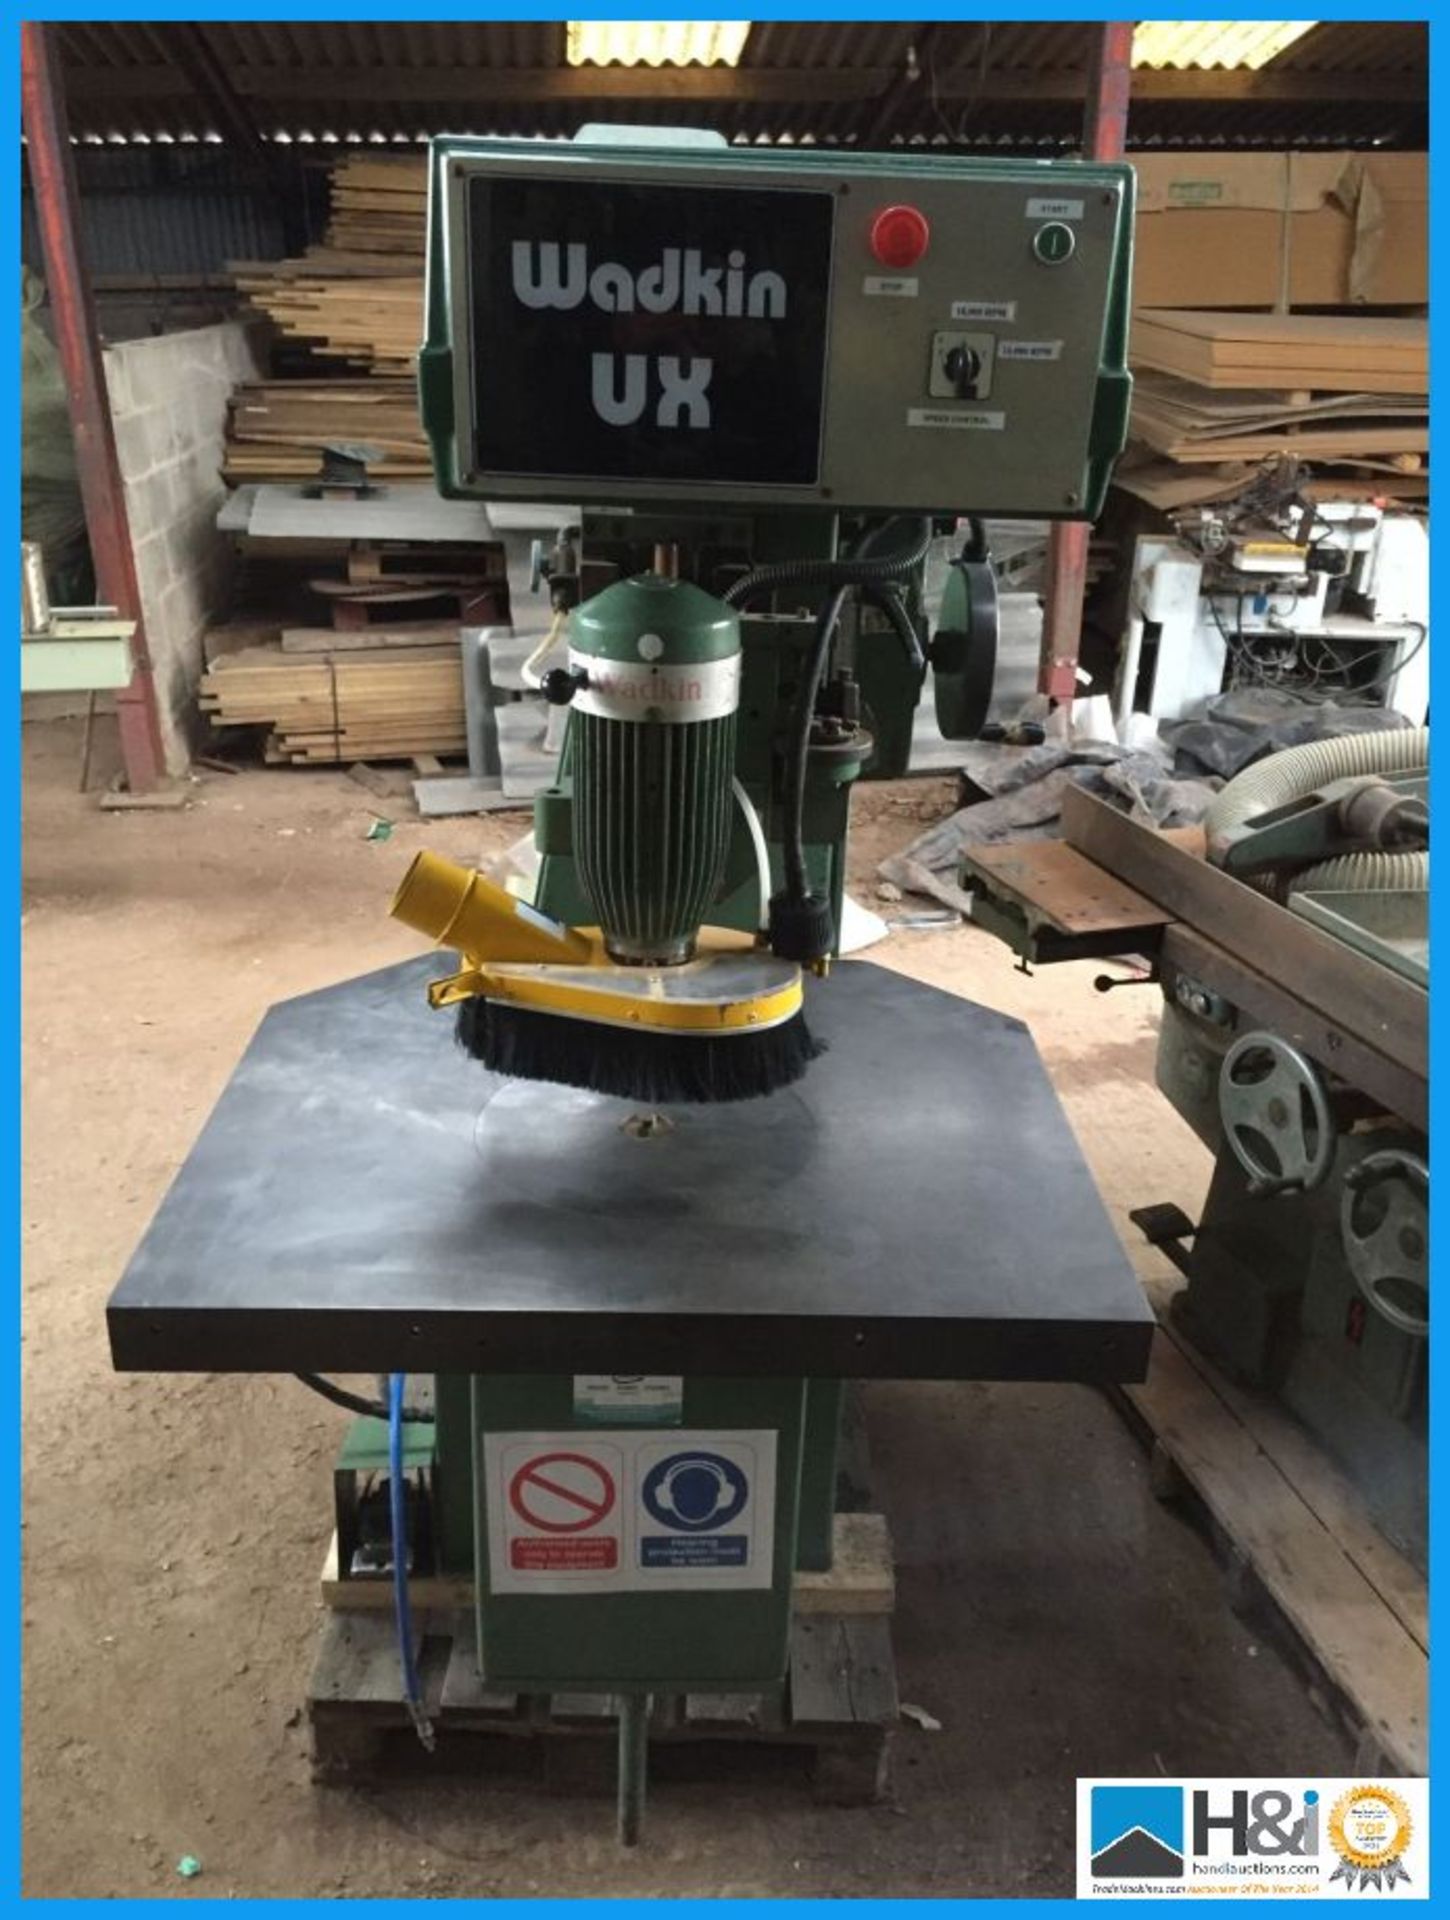 Wadkin UX overhead router with frequency changer. British built, heavy duty. 3 phase machine in good